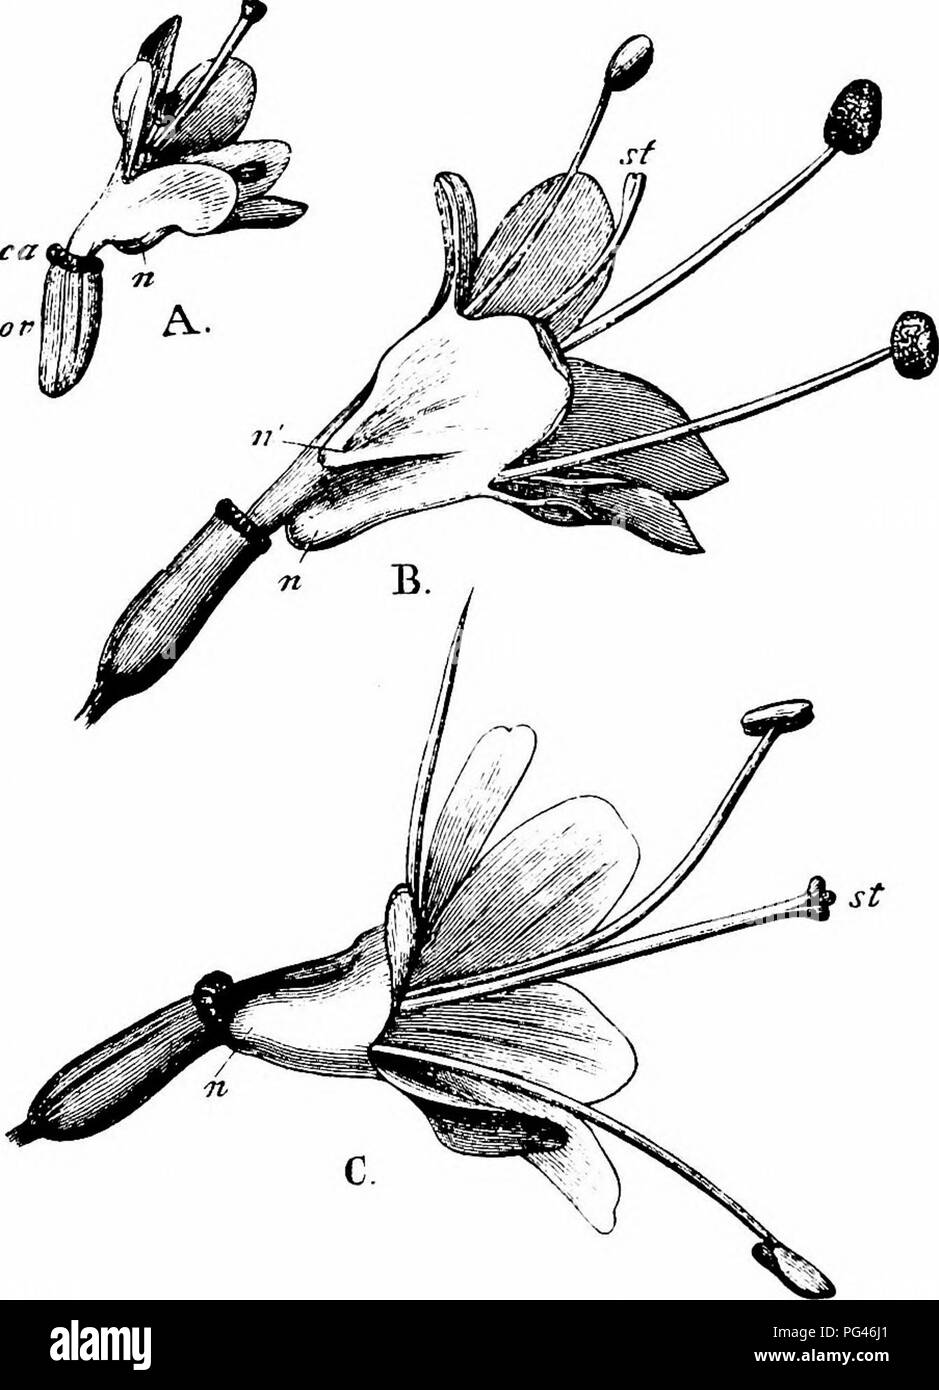 Handbook Of Flower Pollination Based Upon Hermann Mu Ller S Work The Fertilisation Of Flowers By Insects Fertilization Of Plants 552 Angiospermae Dicotyledones Stocks Bear Large Markedly Protandrous Hermaphrodite Flowers Others Small